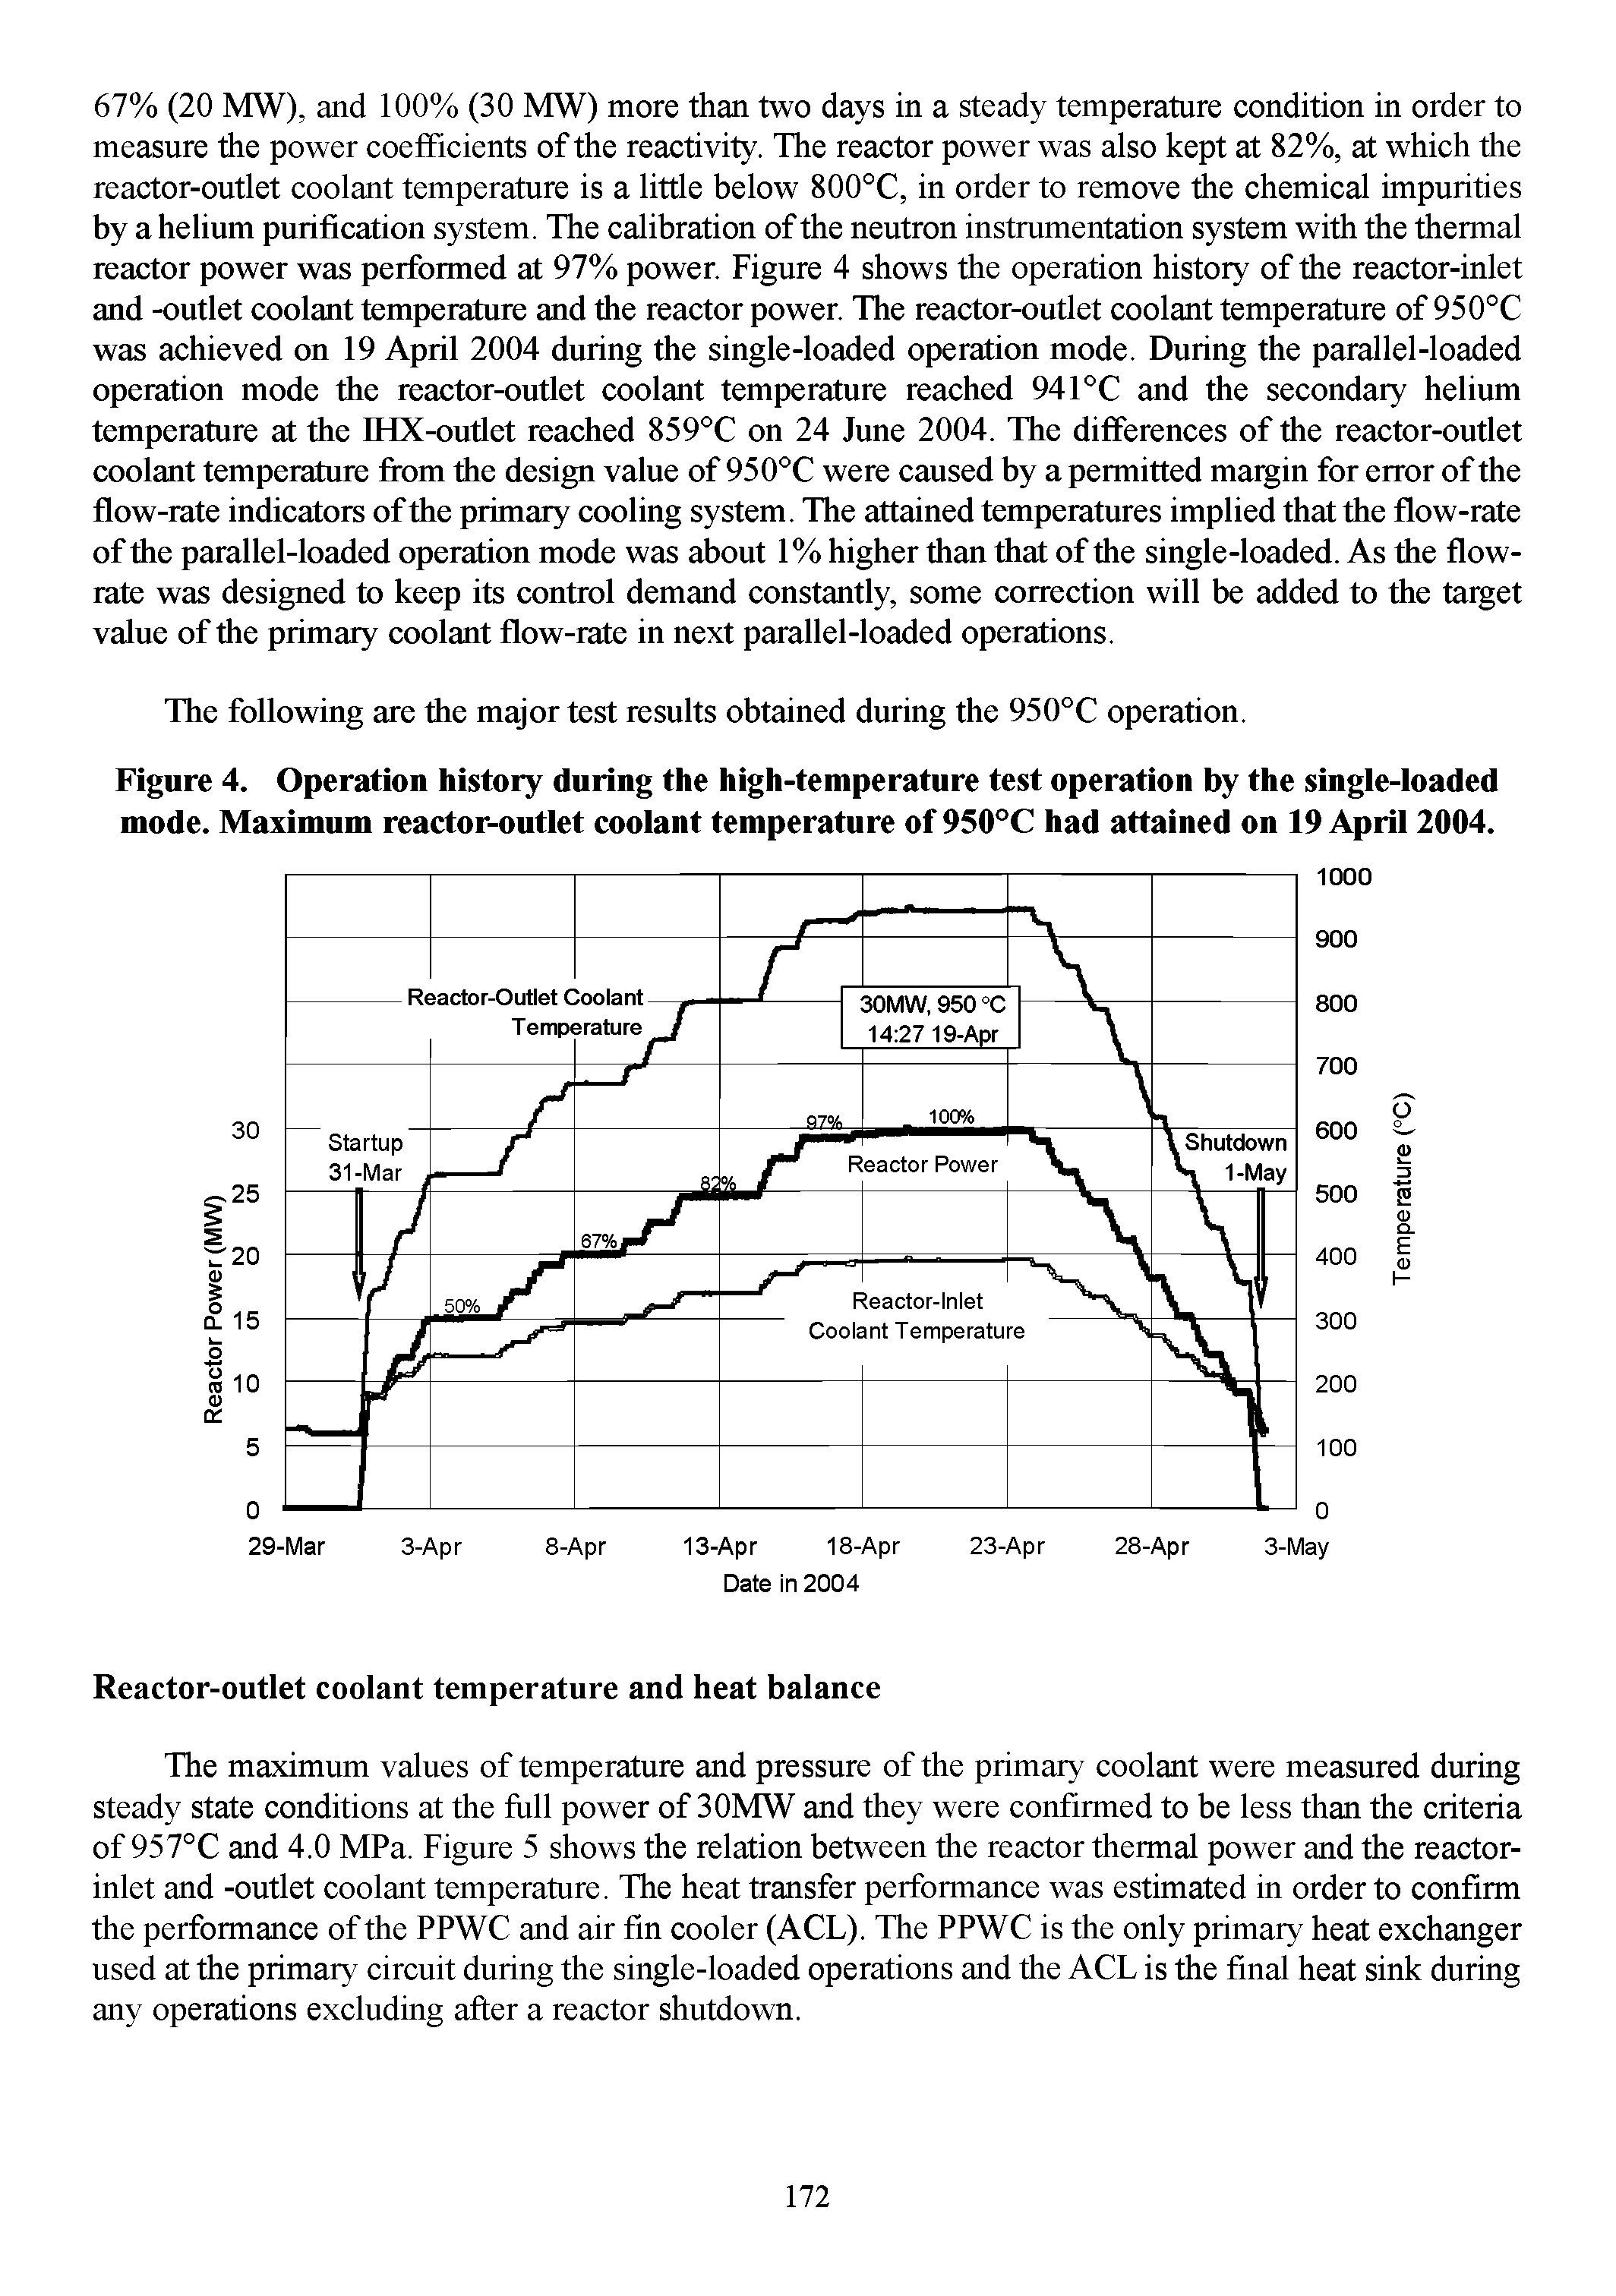 Figure 4. Operation history during the high-temperature test operation by the single-loaded mode. Maximum reactor-outlet coolant temperature of 950°C had attained on 19 April 2004.